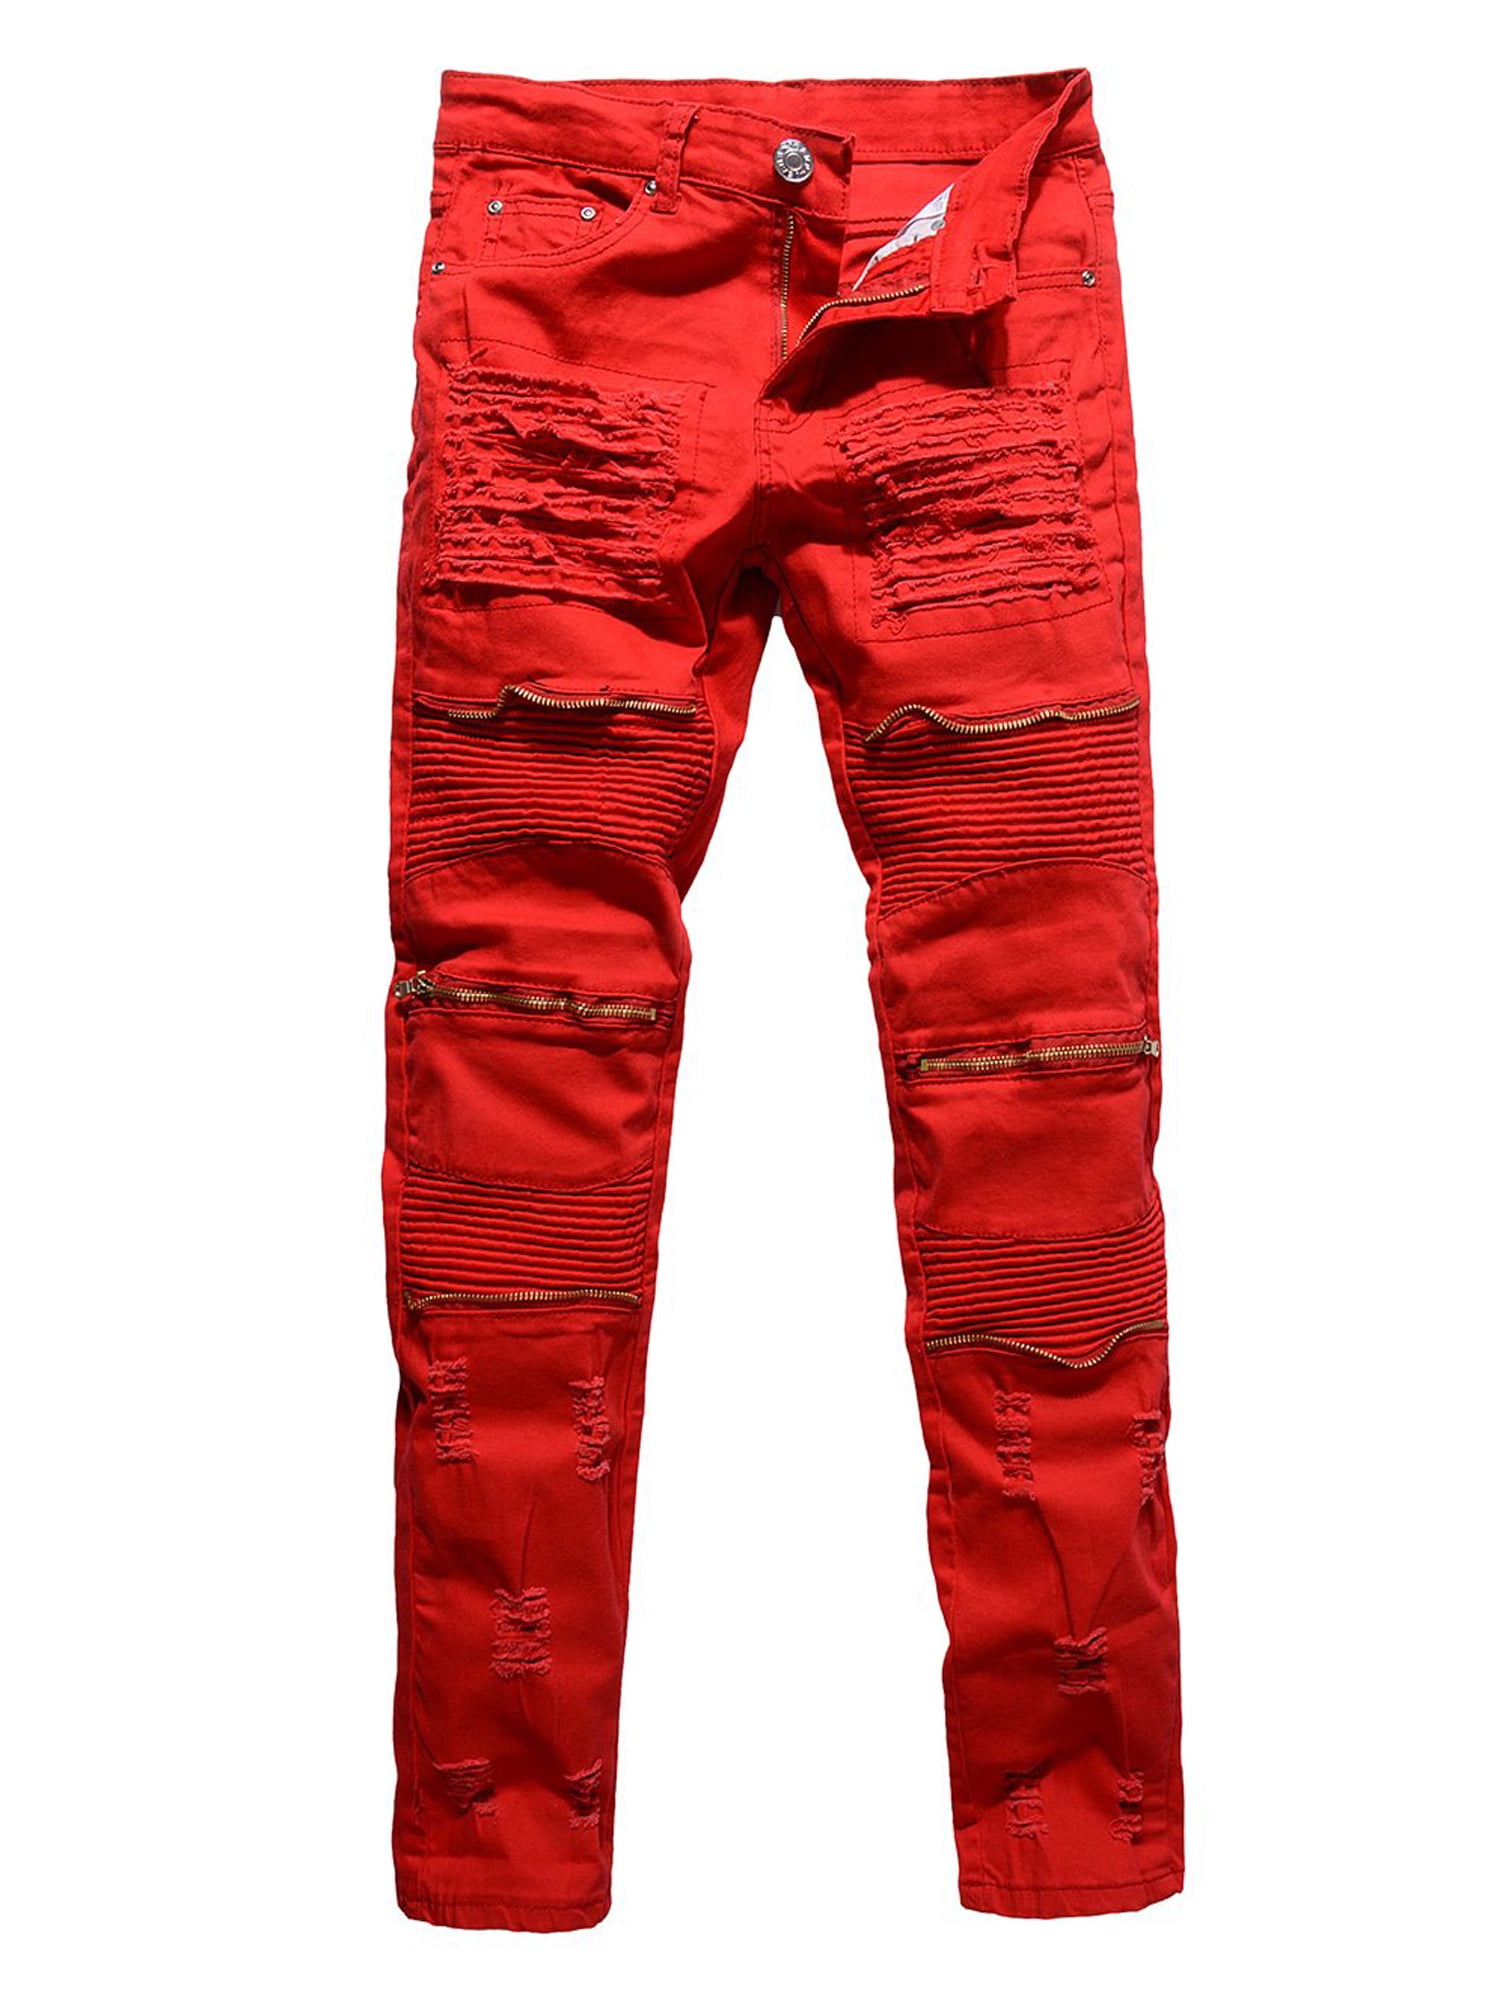 red jeans men outfit